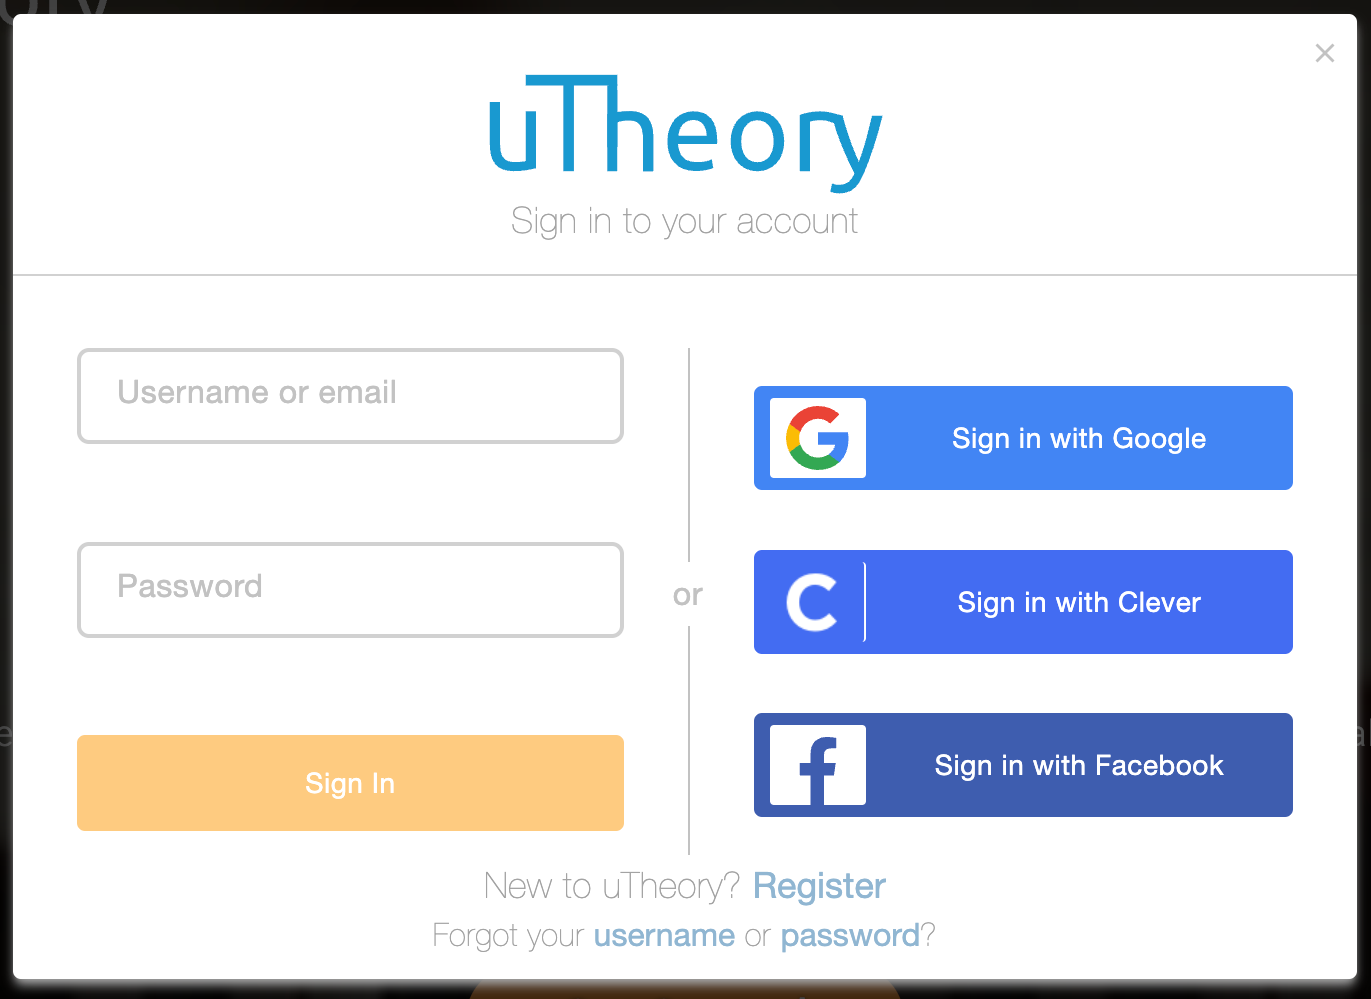 Image of uTheory sign in screen, with buttons to sign in with Google, Clever, and Facebook